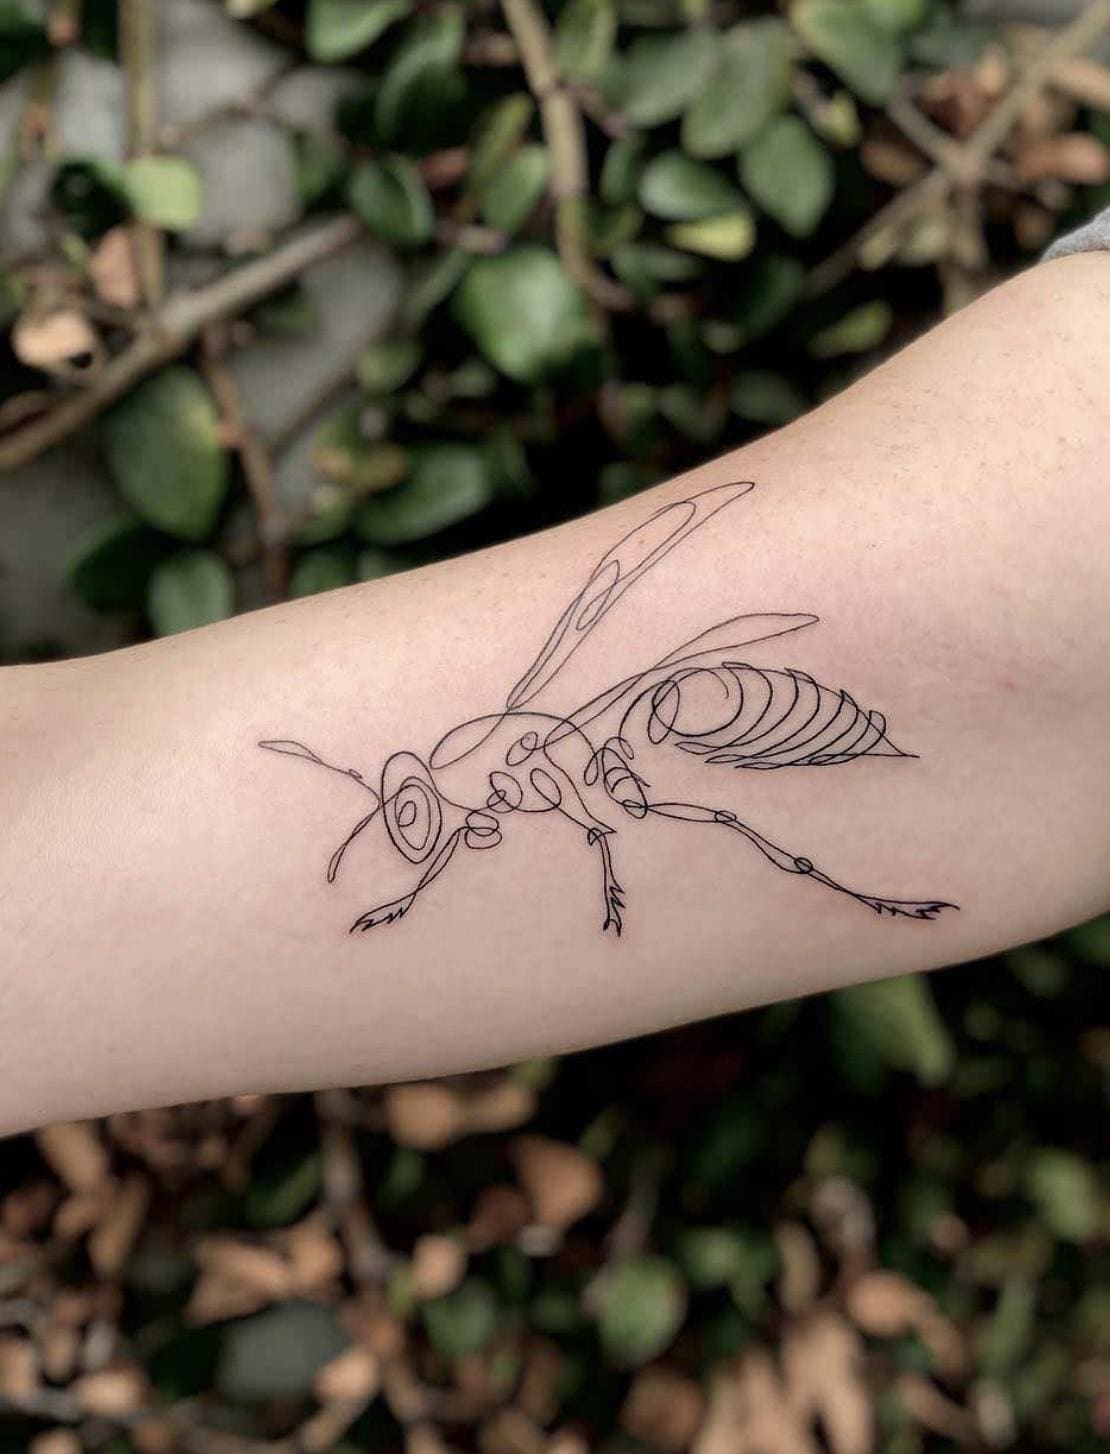 Tattoo of a wasp done with one continuous line